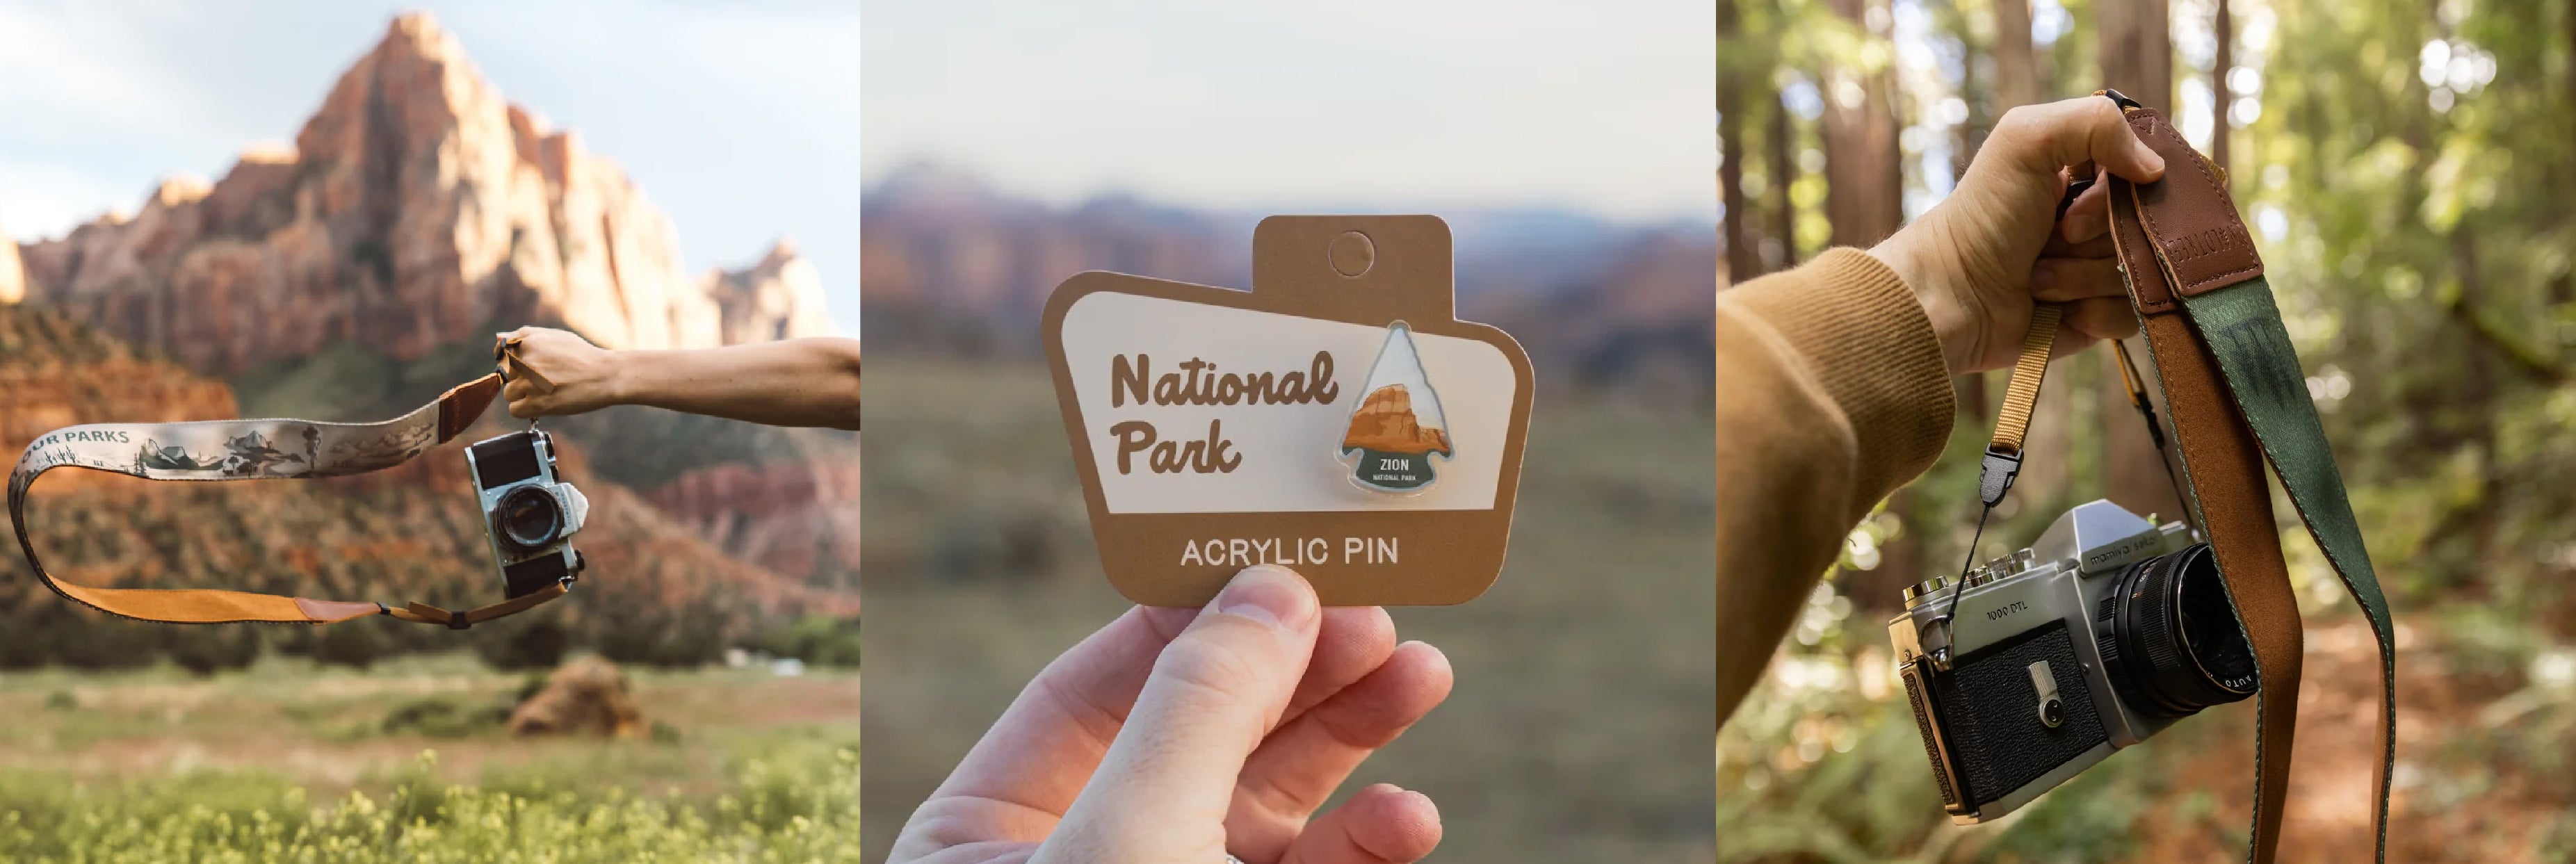 National Park explorer curated gift collection image banner showcasing national park camera strap and acrylic pin